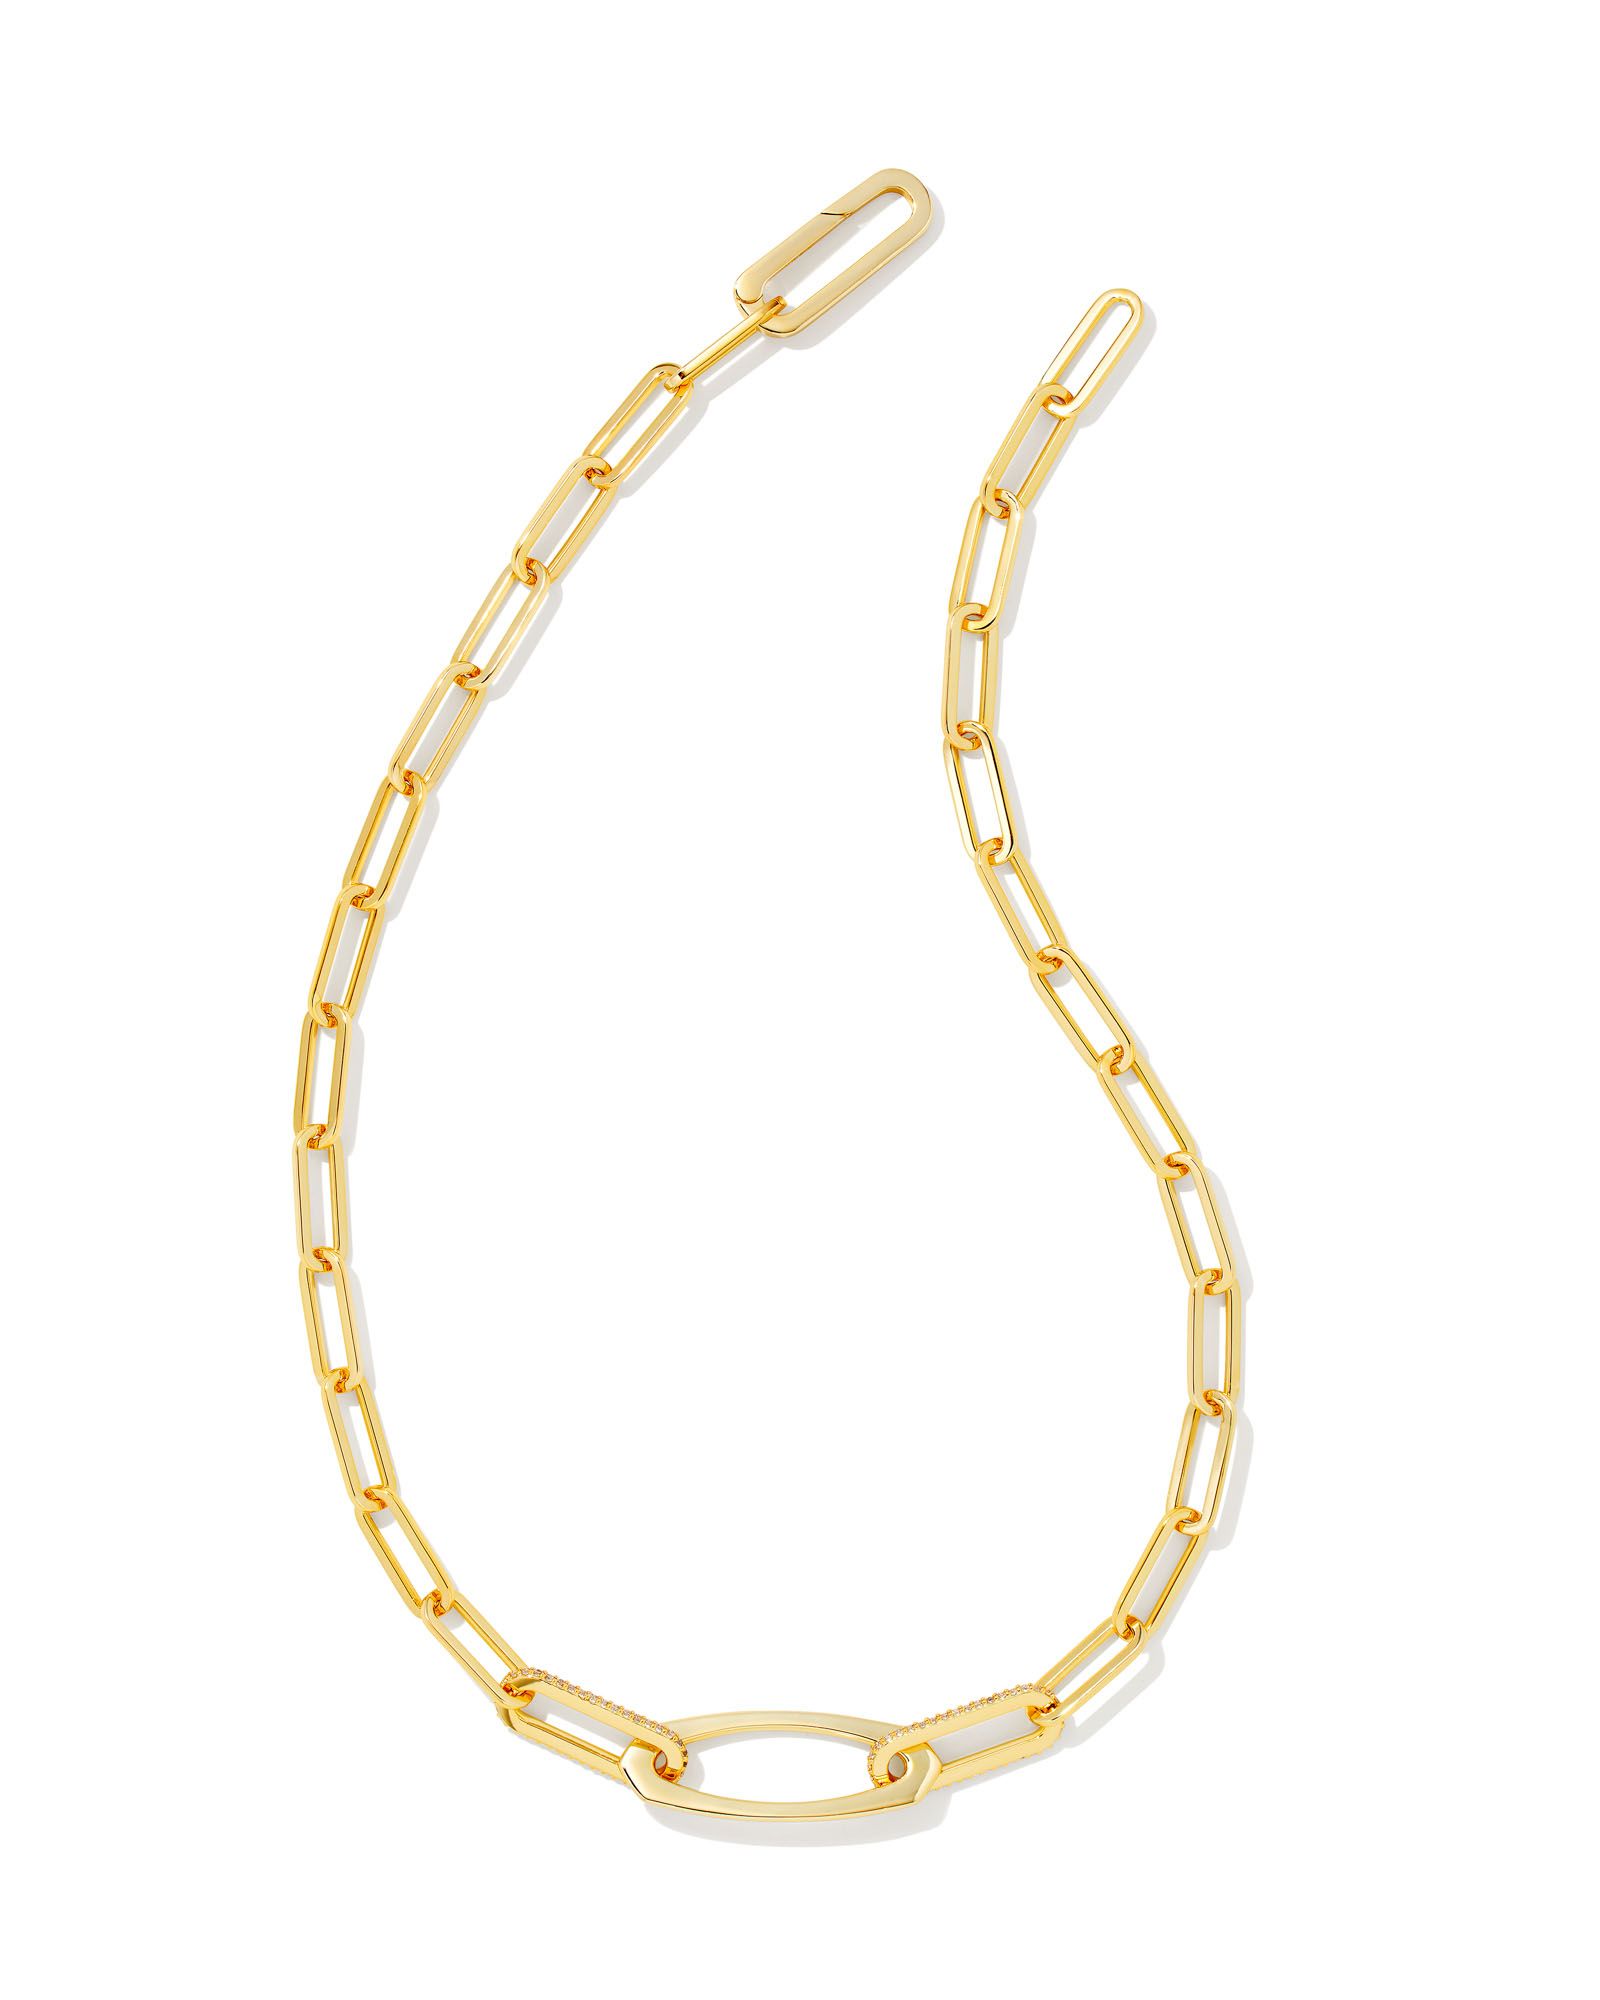 Adeline Chain Necklace in Gold | Kendra Scott